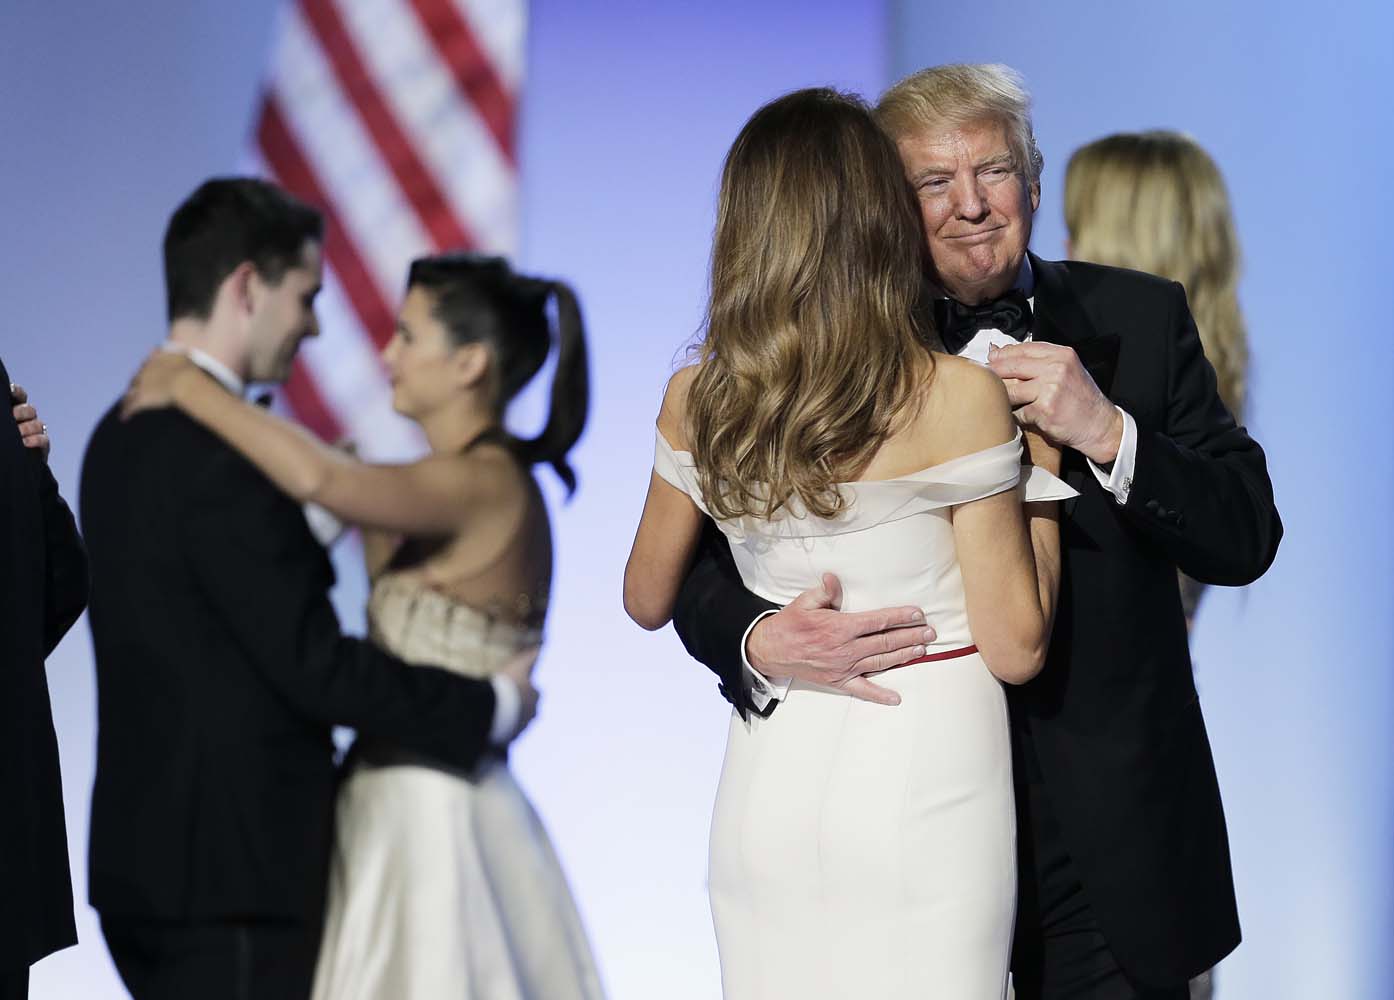 President Donald Trump and first lady Melania dance at the Freedom Ball in Washington, on Friday, Jan. 20, 2017, at the Washington Convention Center during the 58th presidential inauguration . (AP Photo/Mark Tenally)